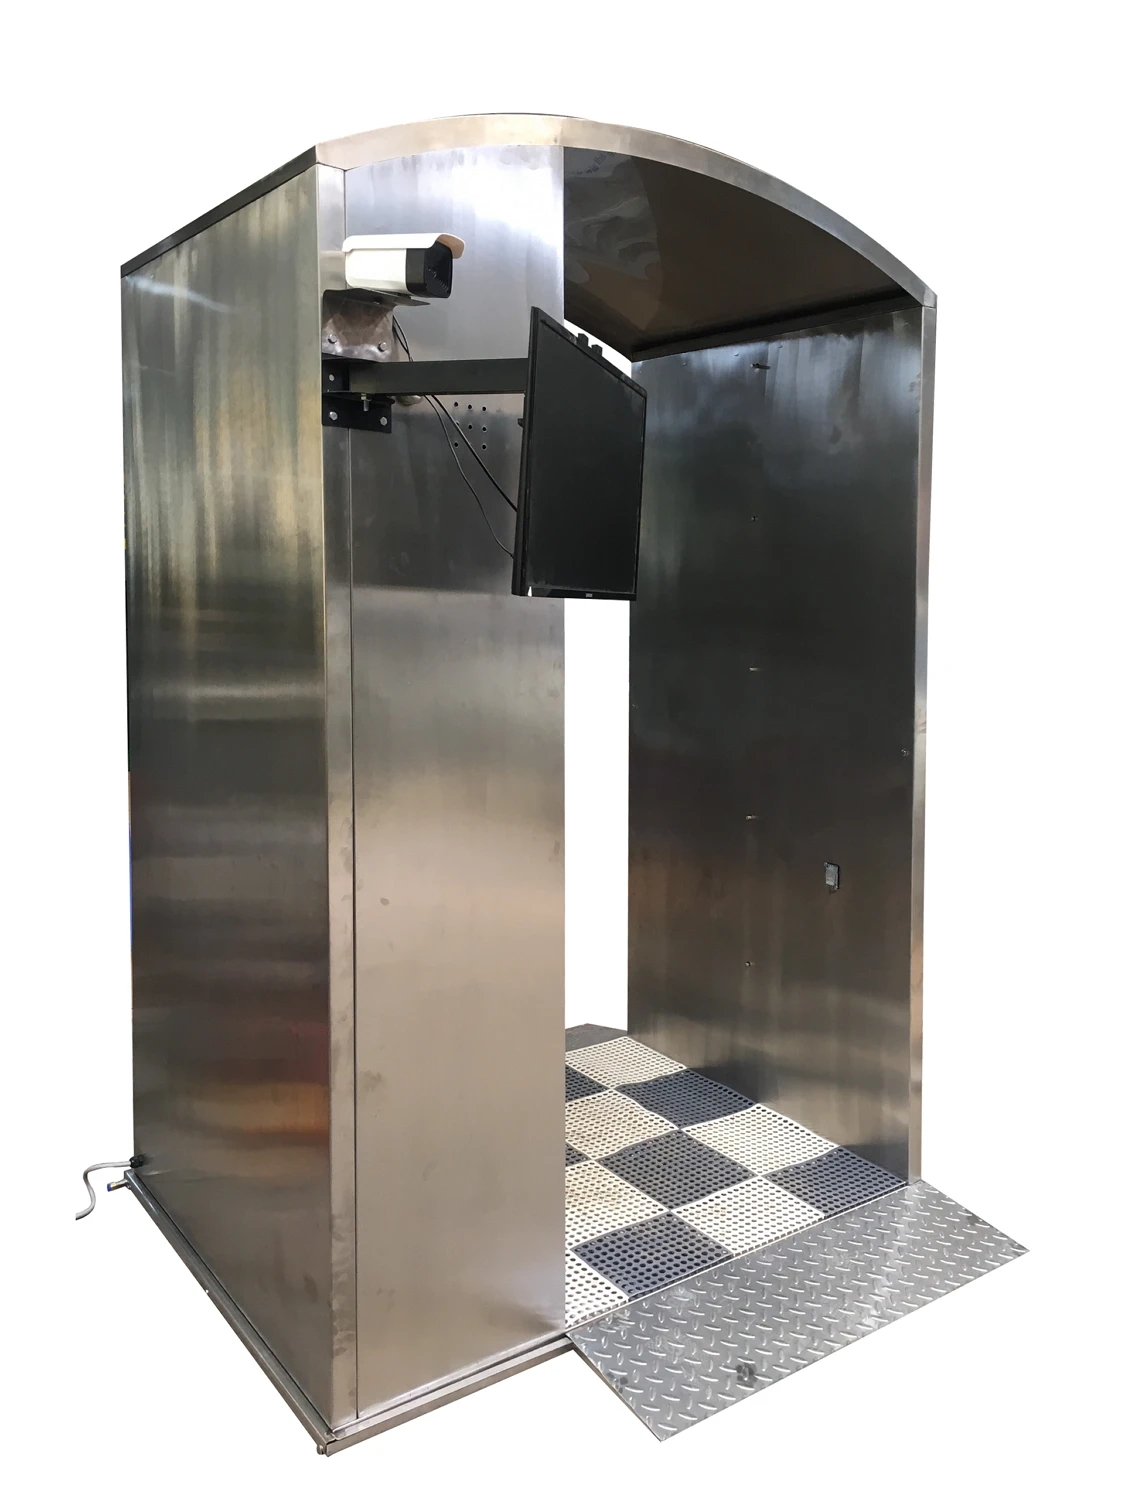 Disinfection Gate Disinfection Access Door - Disinfection Gate with Thermal